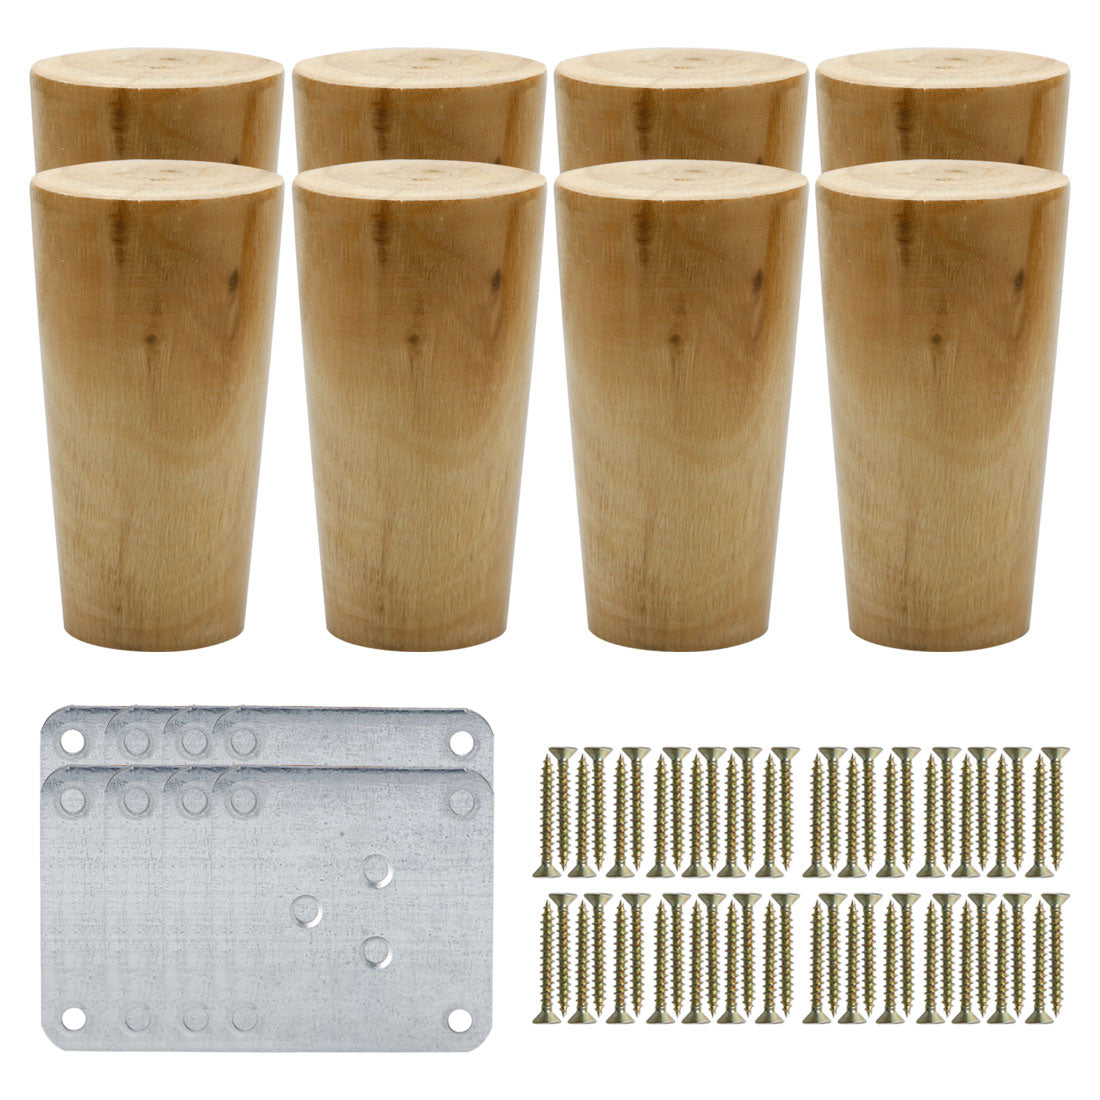 uxcell Uxcell 4" Round Solid Wood Furniture Leg Chair Sofa Cabinet Feet Replacement Set of 8